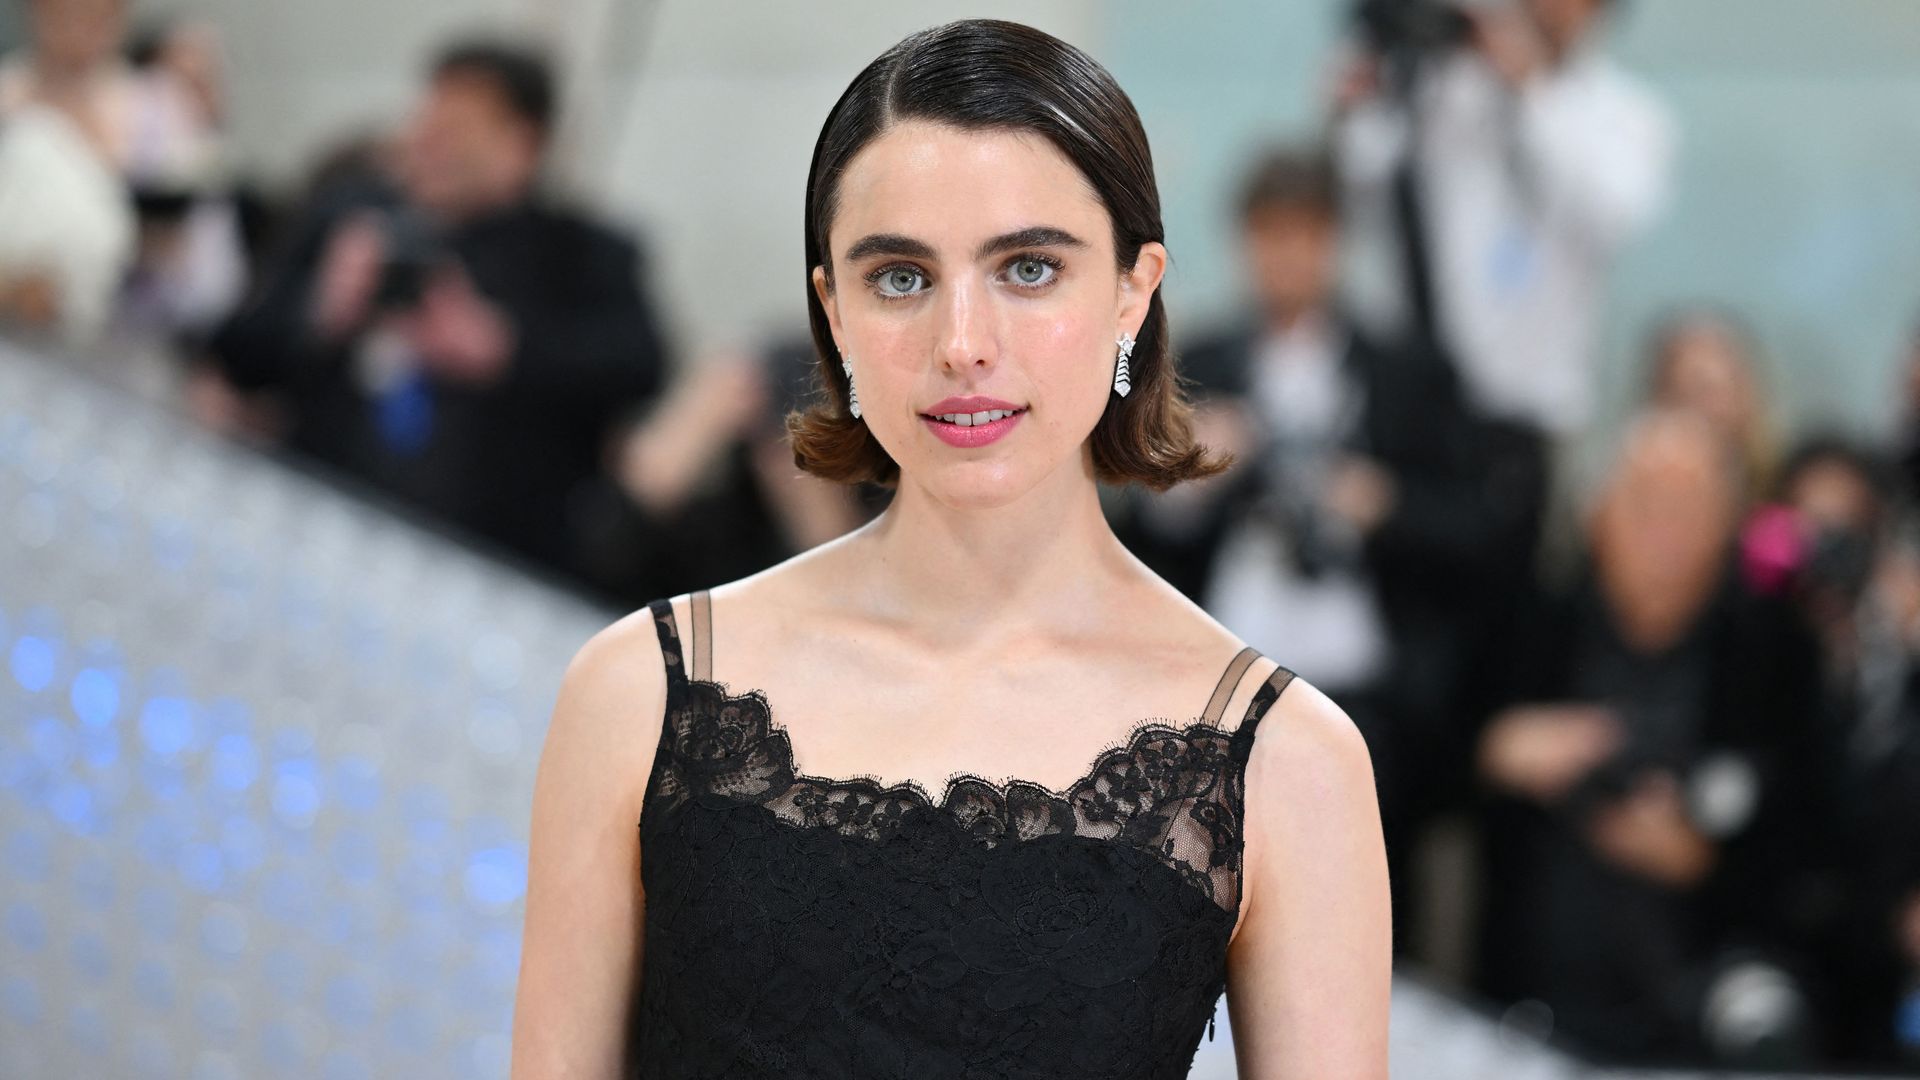 Margaret Qualley shows off epic engagement ring during rare appearance with famous fiancé